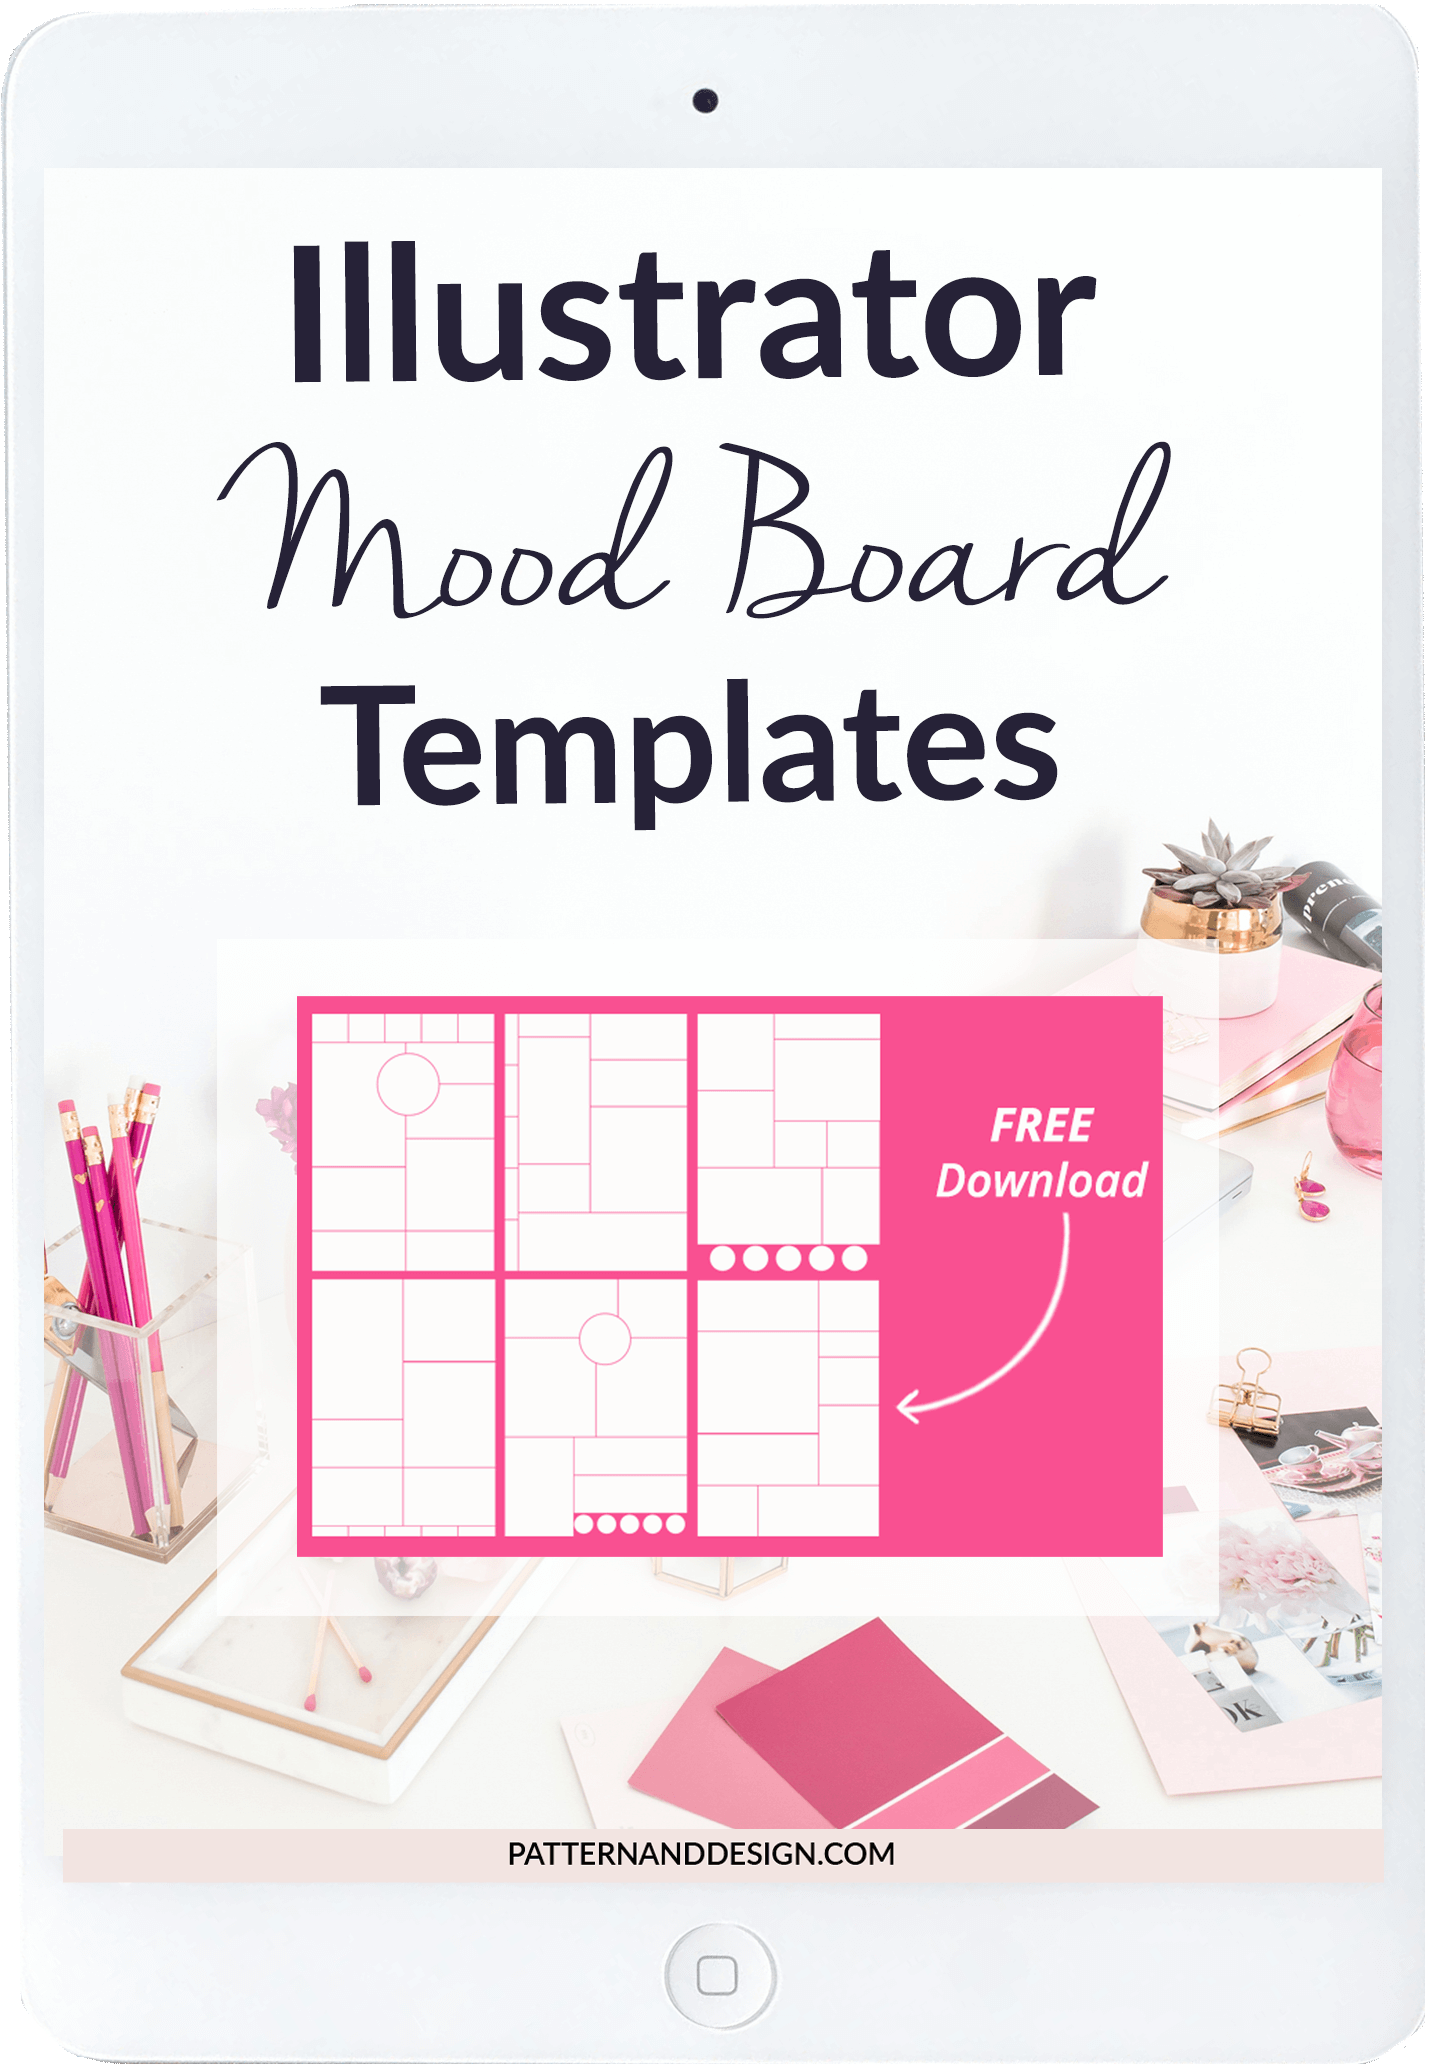 Get free illustrator mood board templates to help you with your surface pattern designing